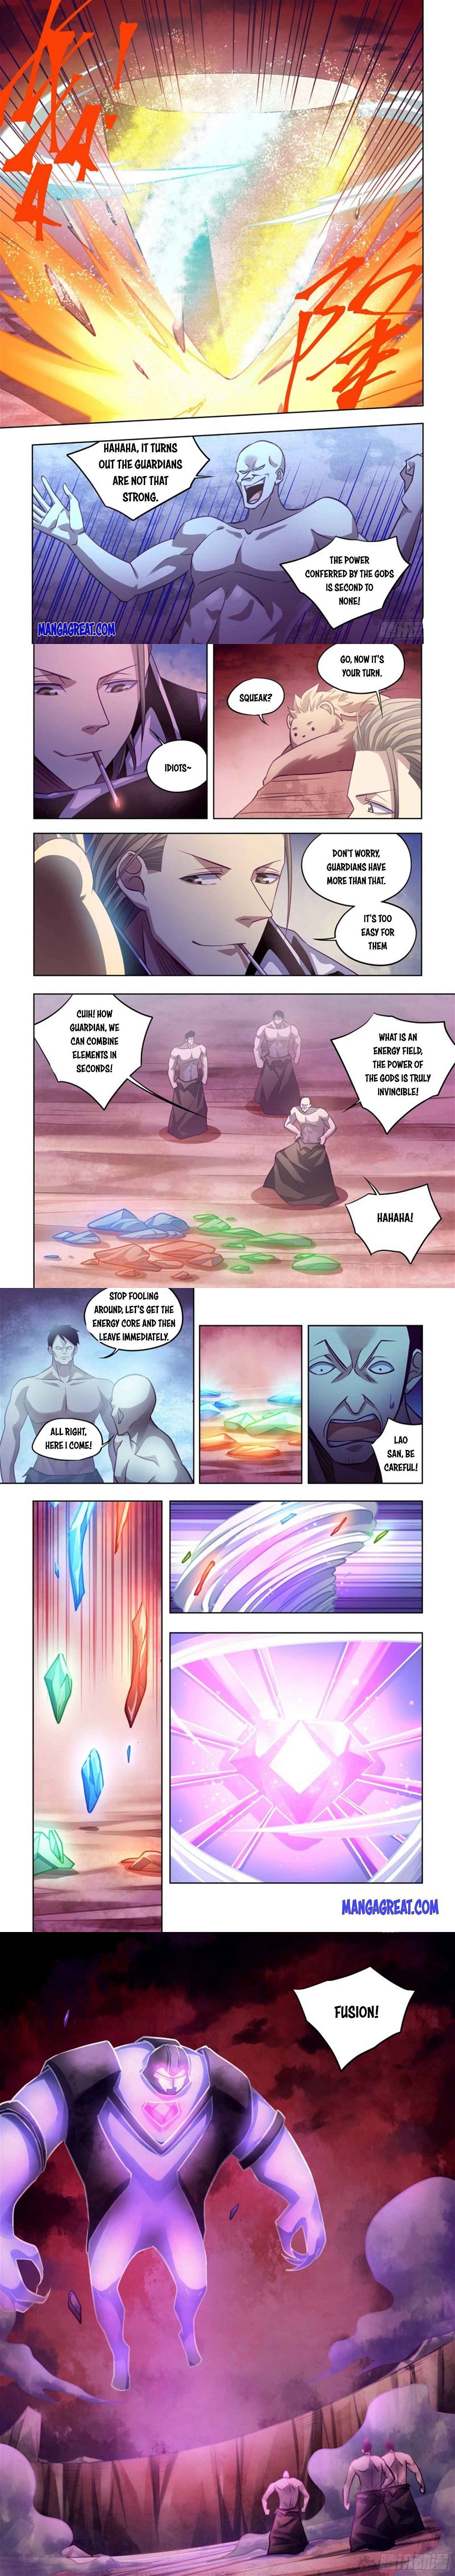 The Last Human Chapter 354 - Page 3